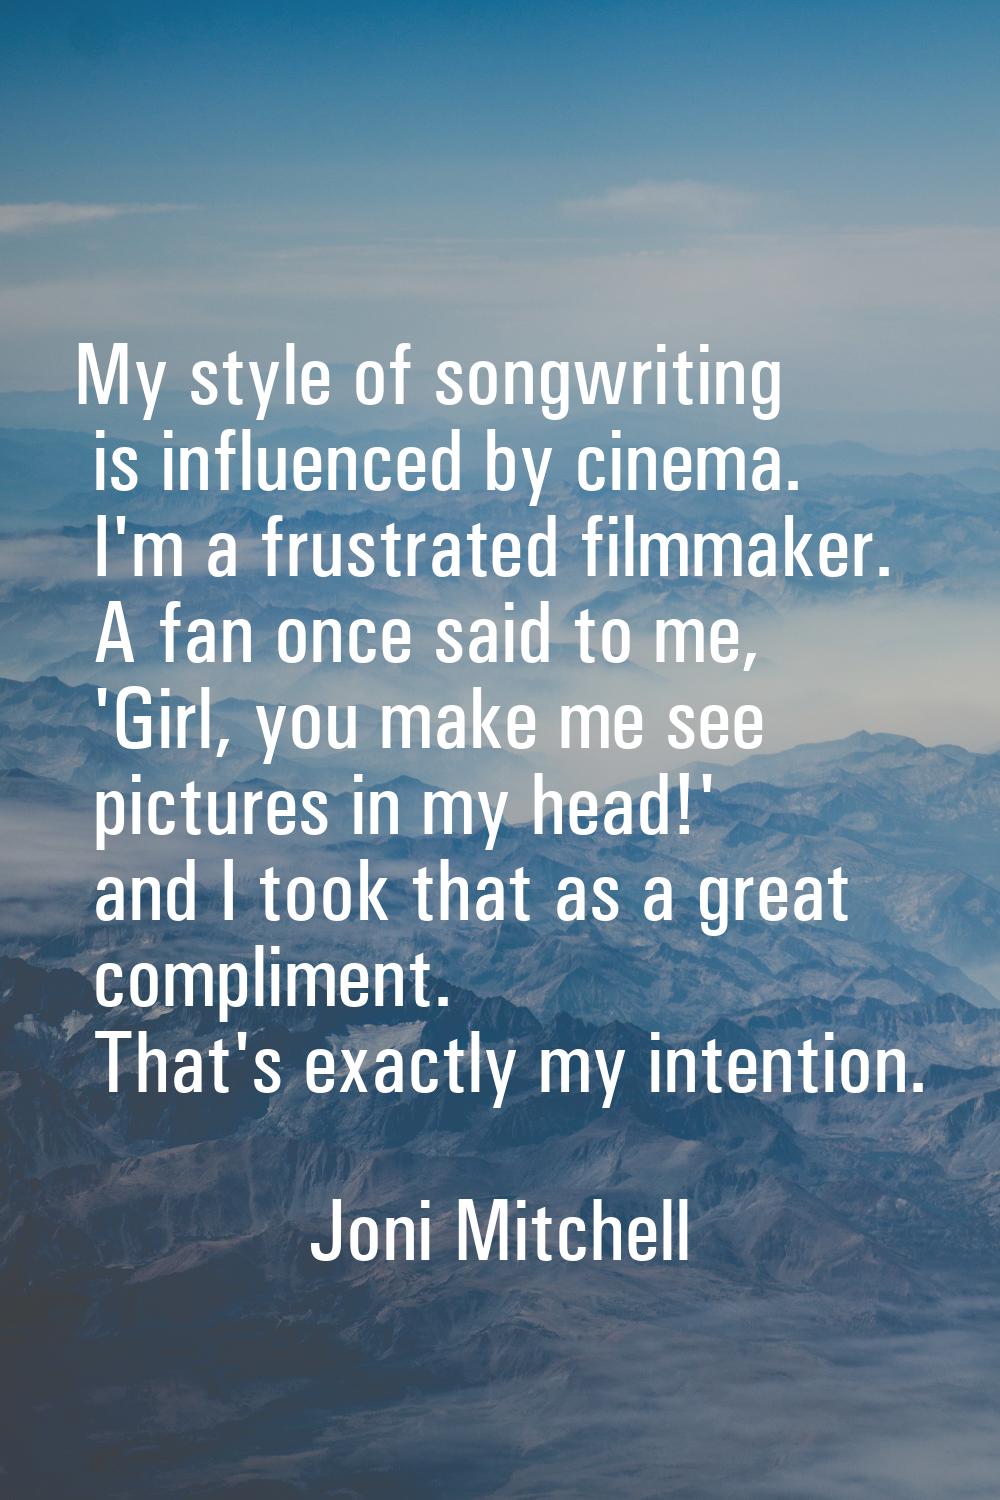 My style of songwriting is influenced by cinema. I'm a frustrated filmmaker. A fan once said to me,